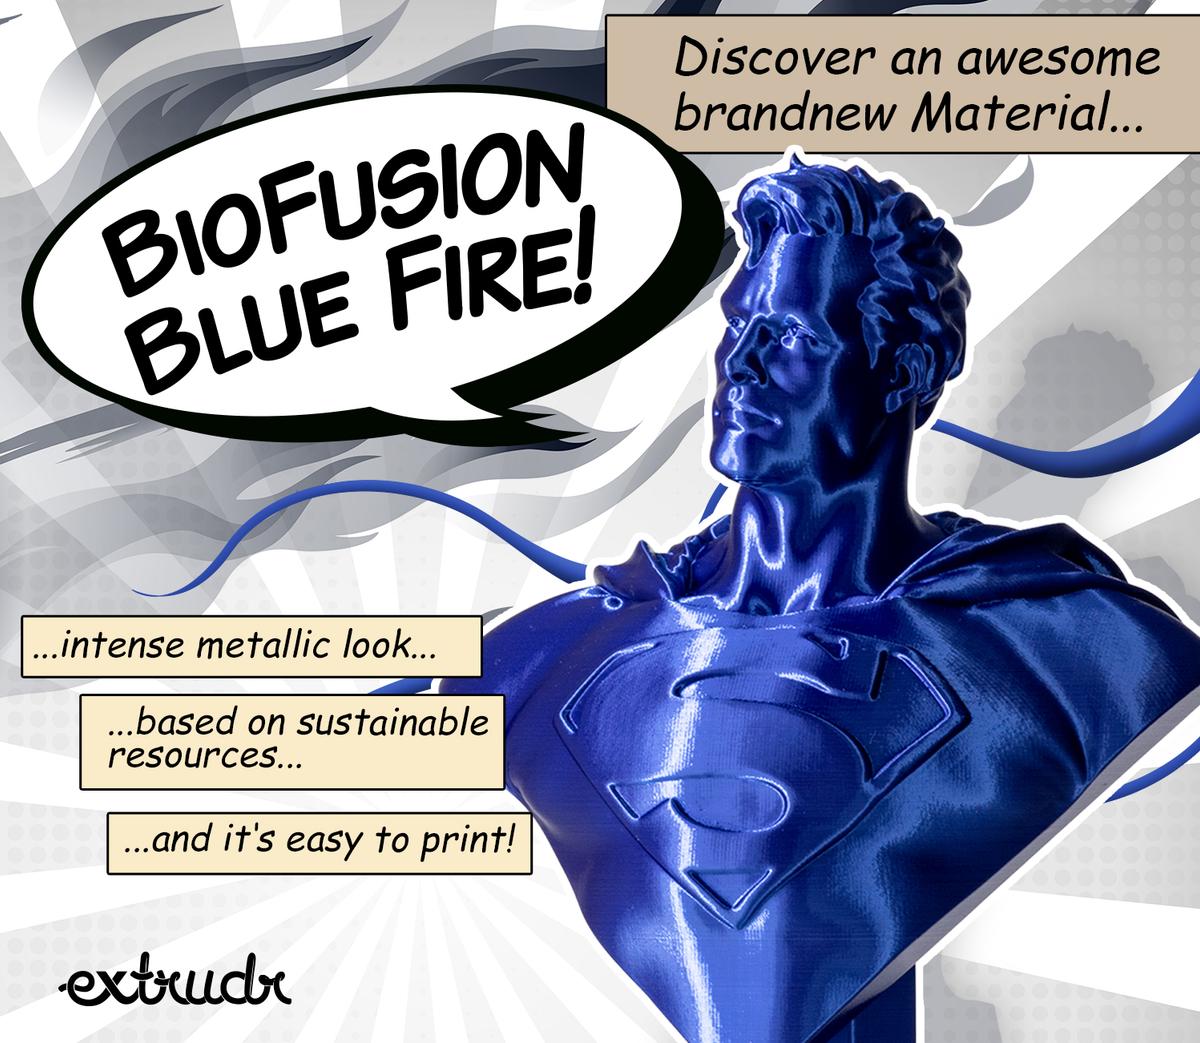 Extrudr BioFusion - Blue Fire [1.75mm] (31,13€/Kg)